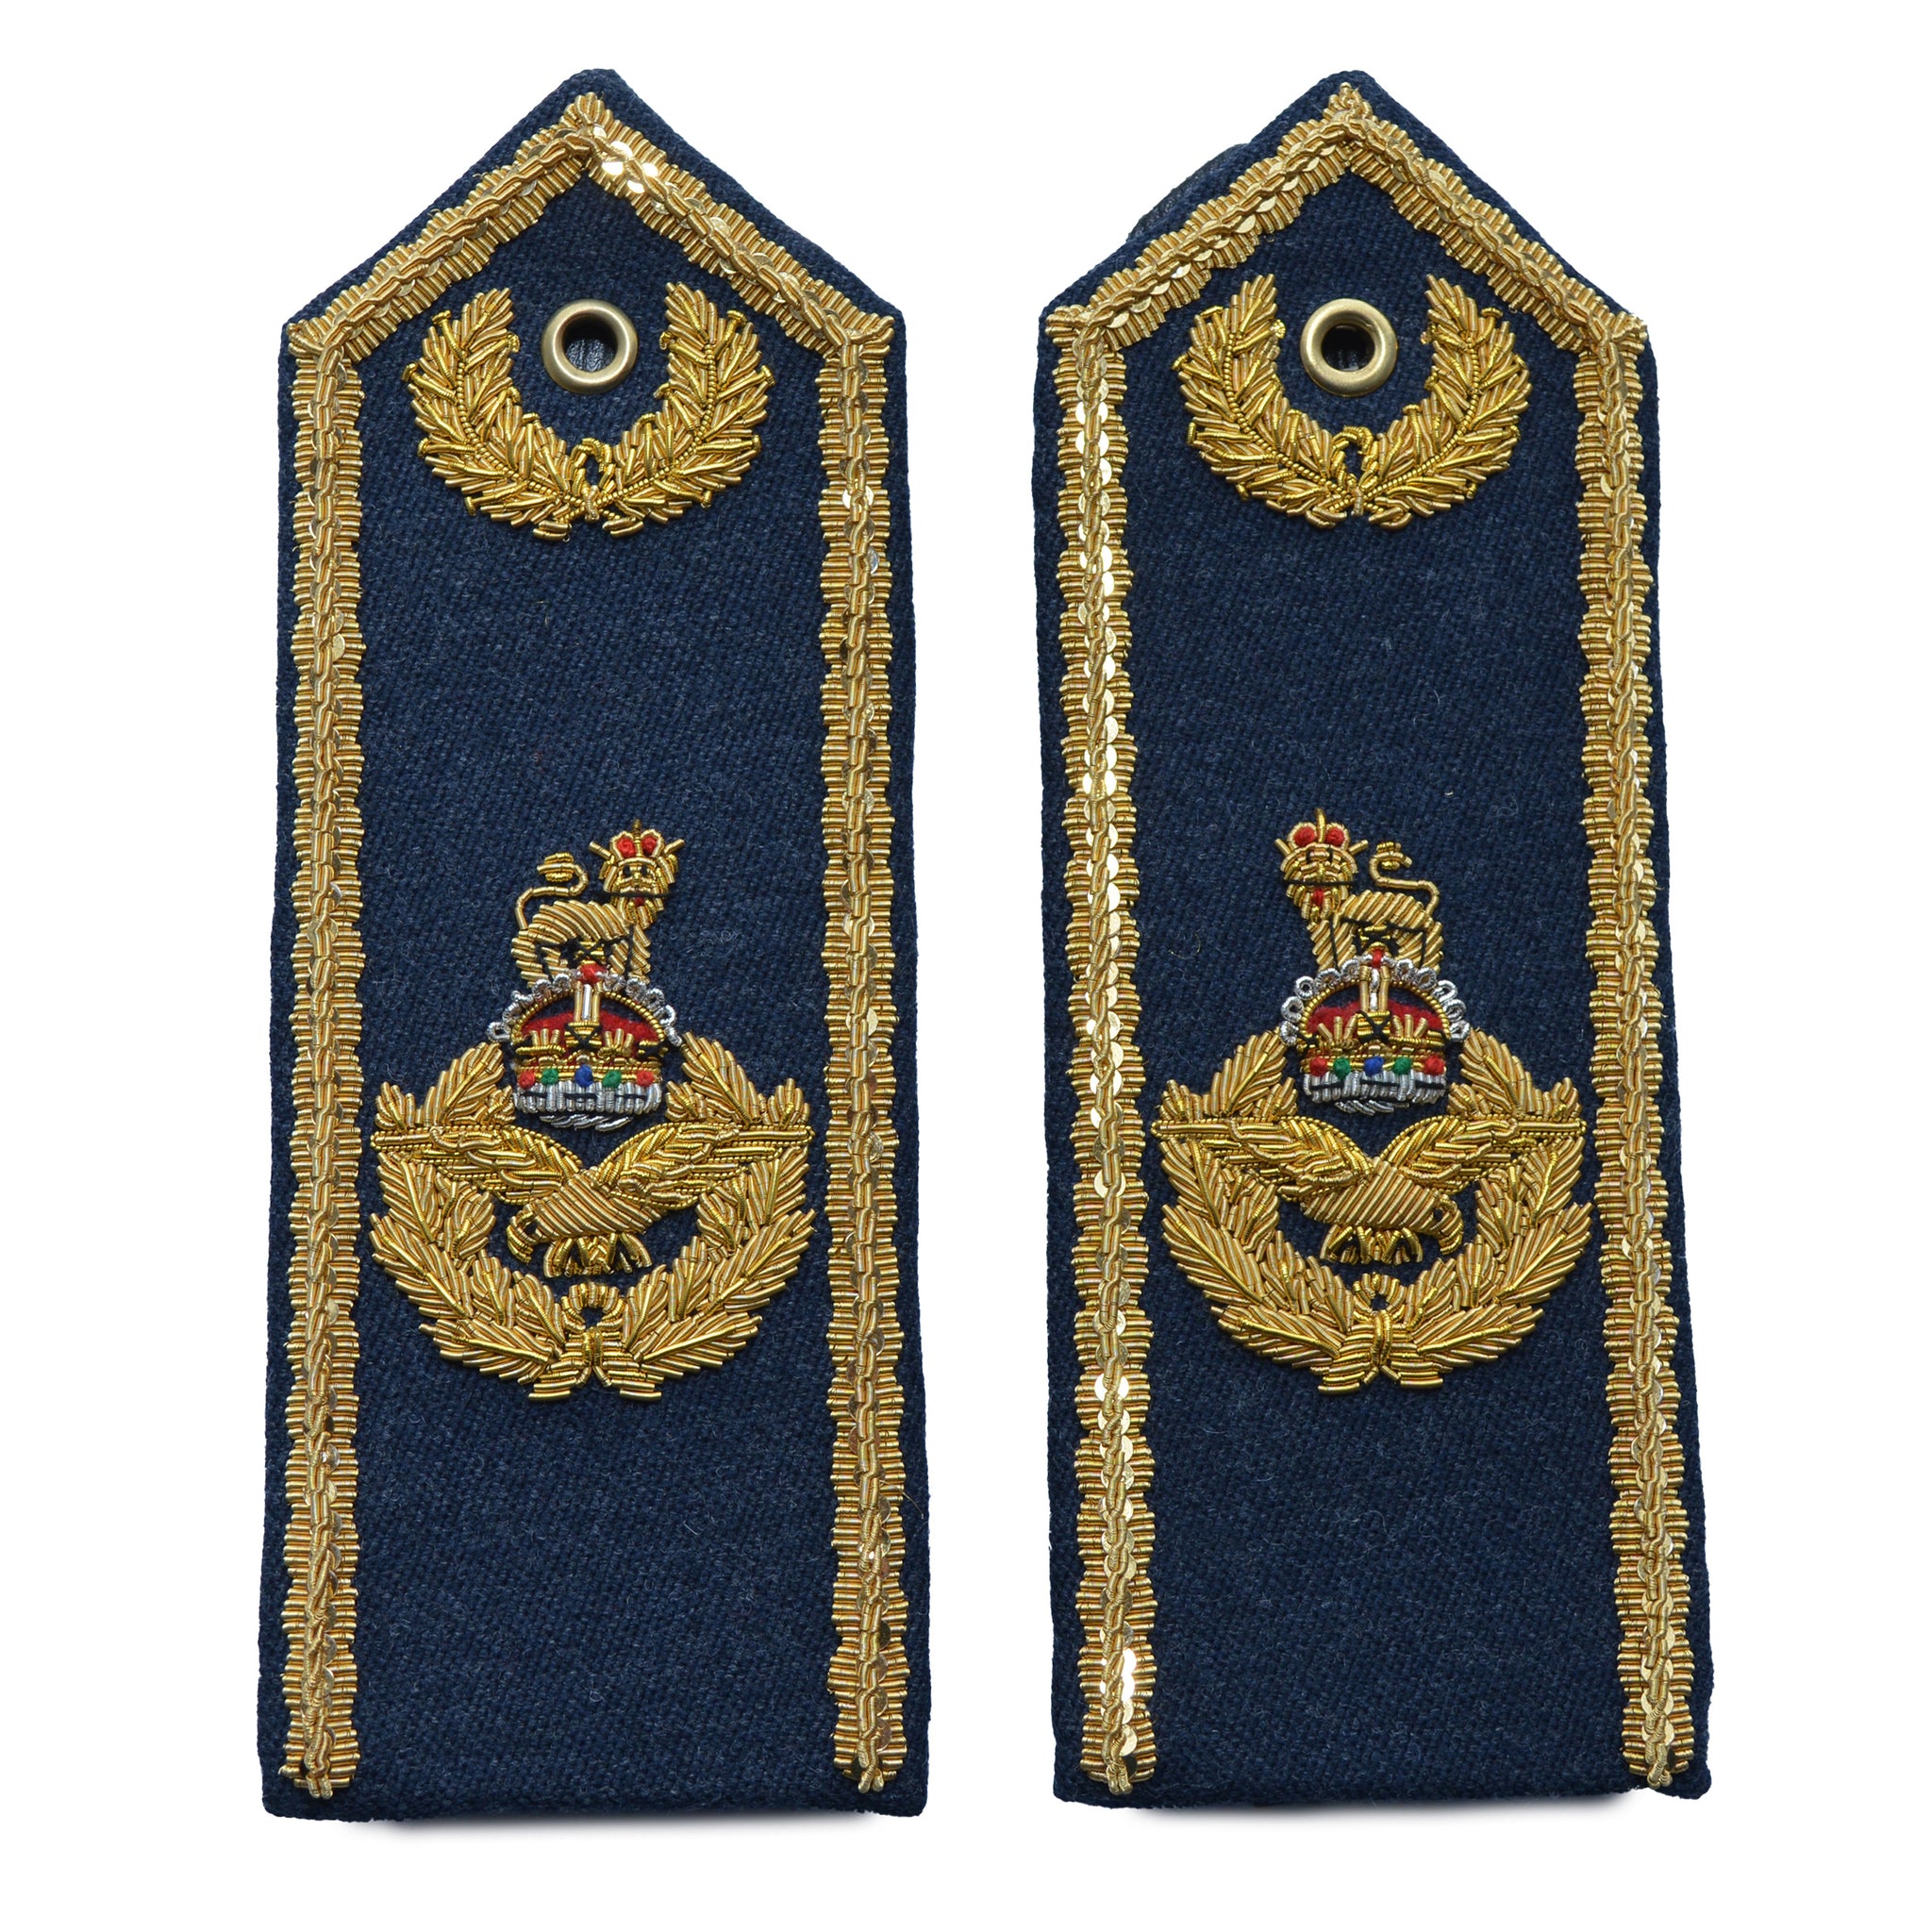 (King's Crown) Air Vice Marshall and Above Shoulder Board Epaulette Royal Air Force Regiment RAF Badge